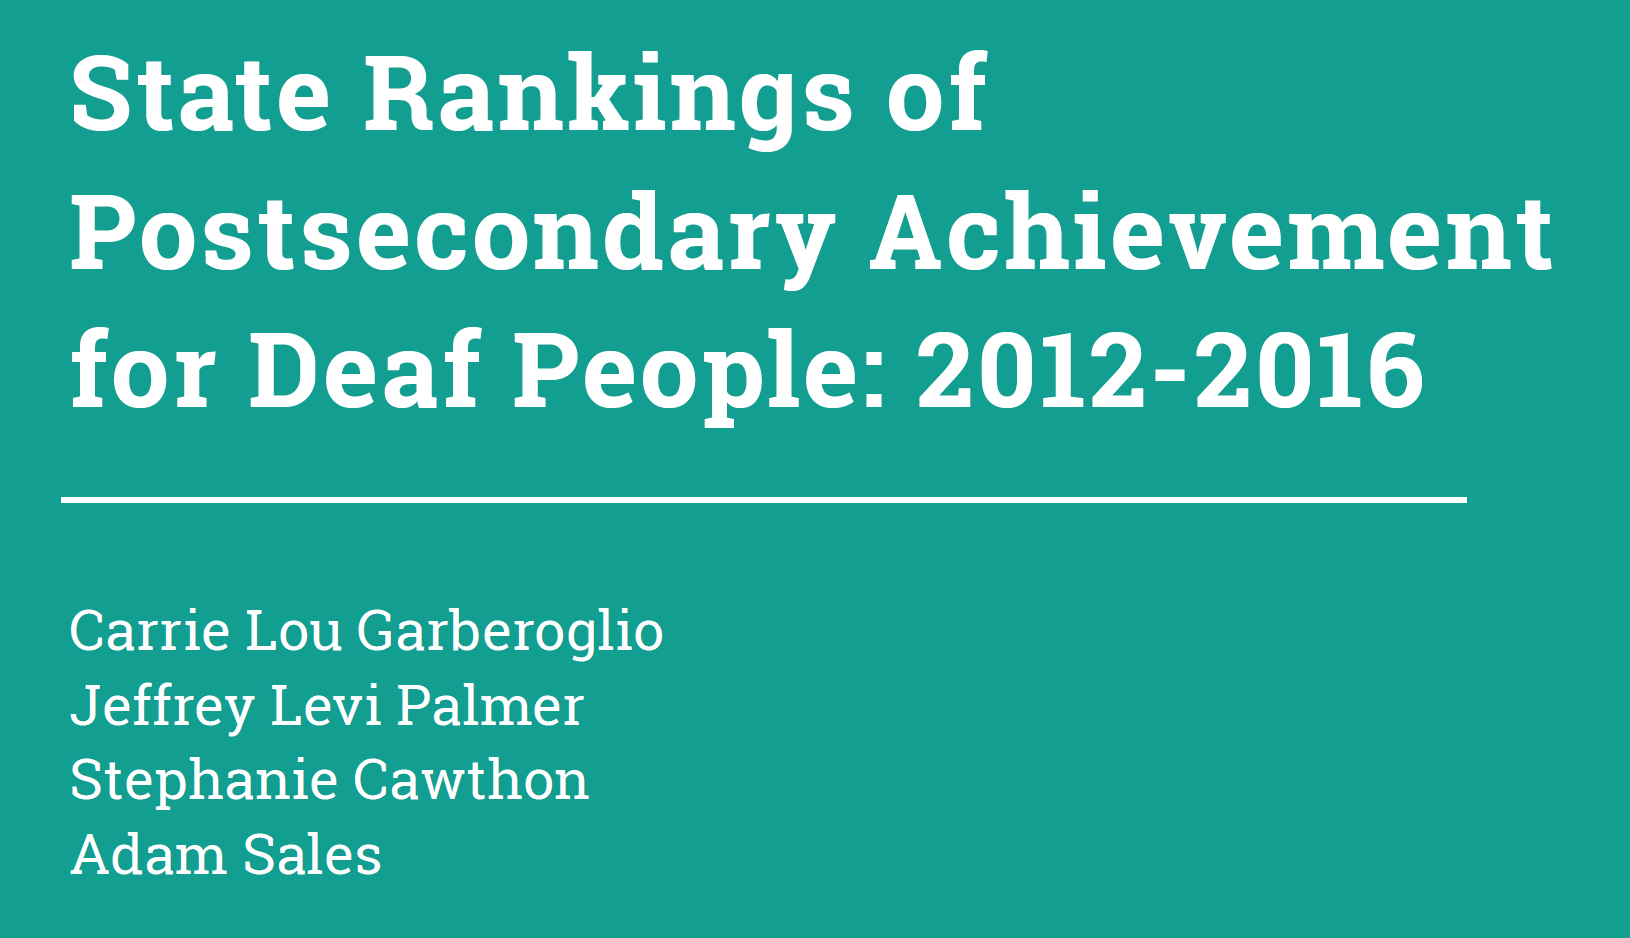 This image has a green background. On top, there is the text " State Ranking for Postsecondary Achievement for Deaf People: 2012-2016". At the Bottom left there are some names mentioned " Carrie Lou Garberoglio, Jeffrey Levi Palmer, Stephanie Cawthon, and Adam Sales."